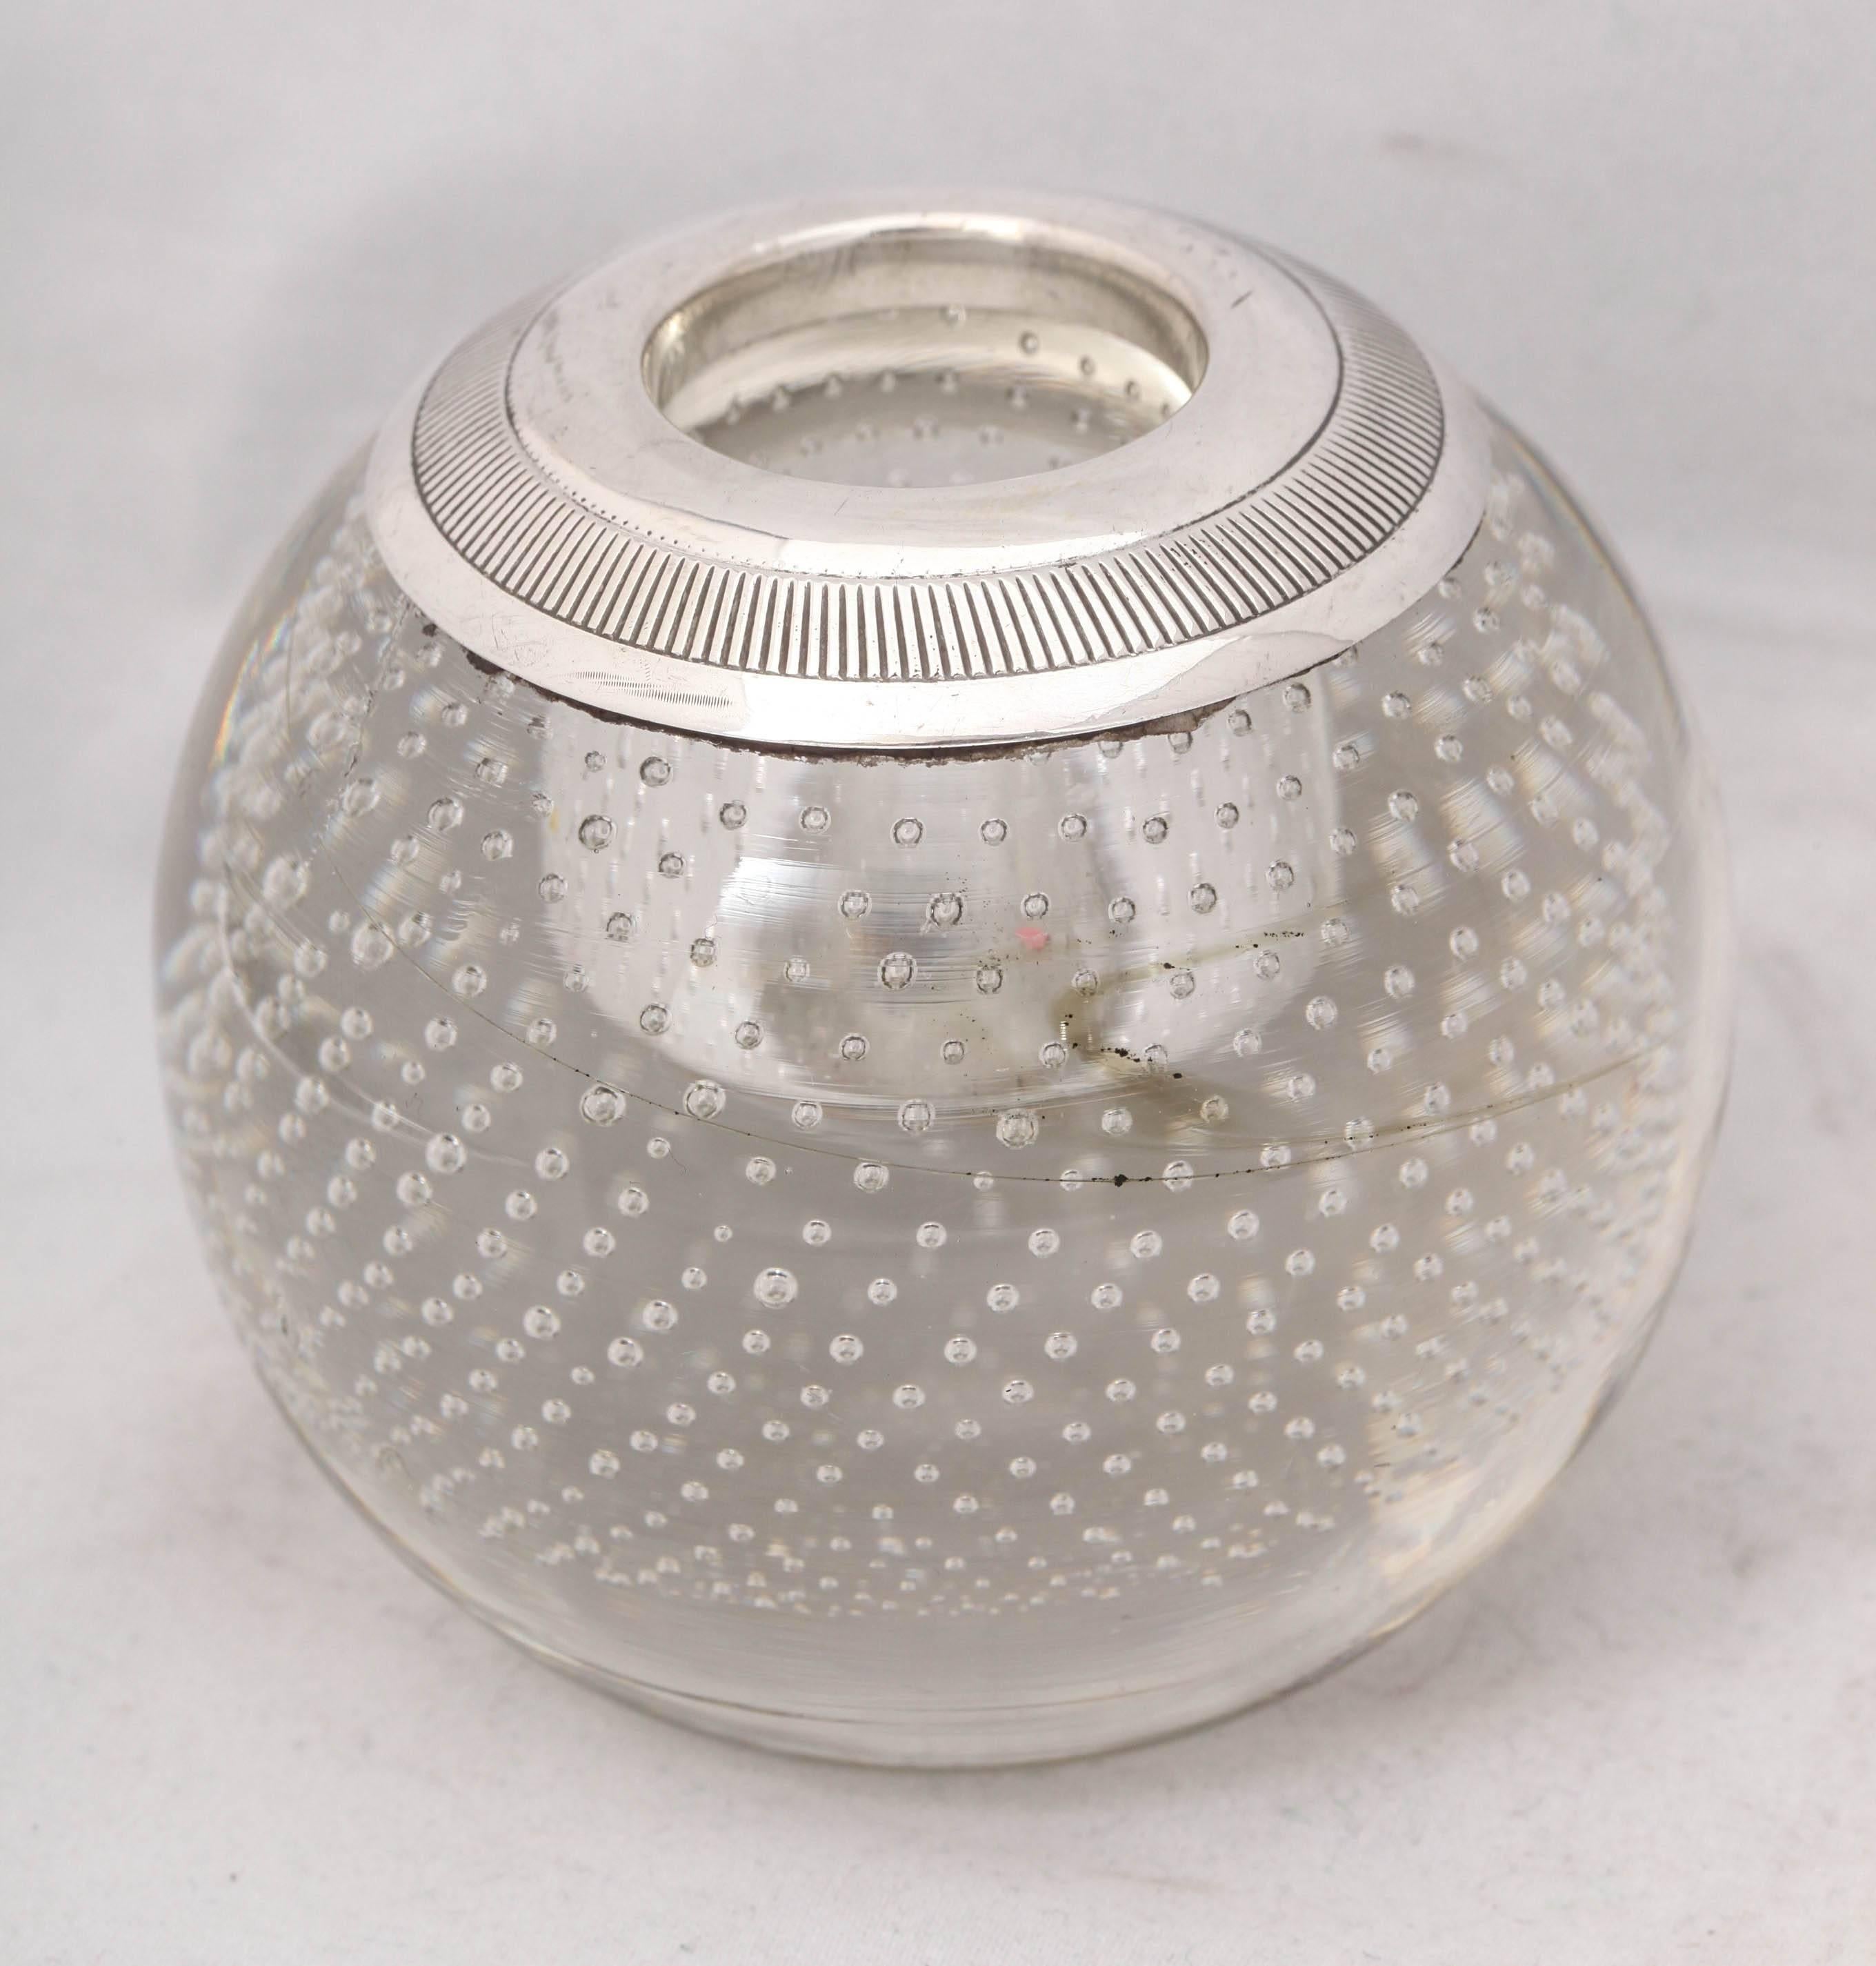 Early 20th Century Large Edwardian Sterling Silver-Mounted Controlled Bubbles Crystal Match Striker